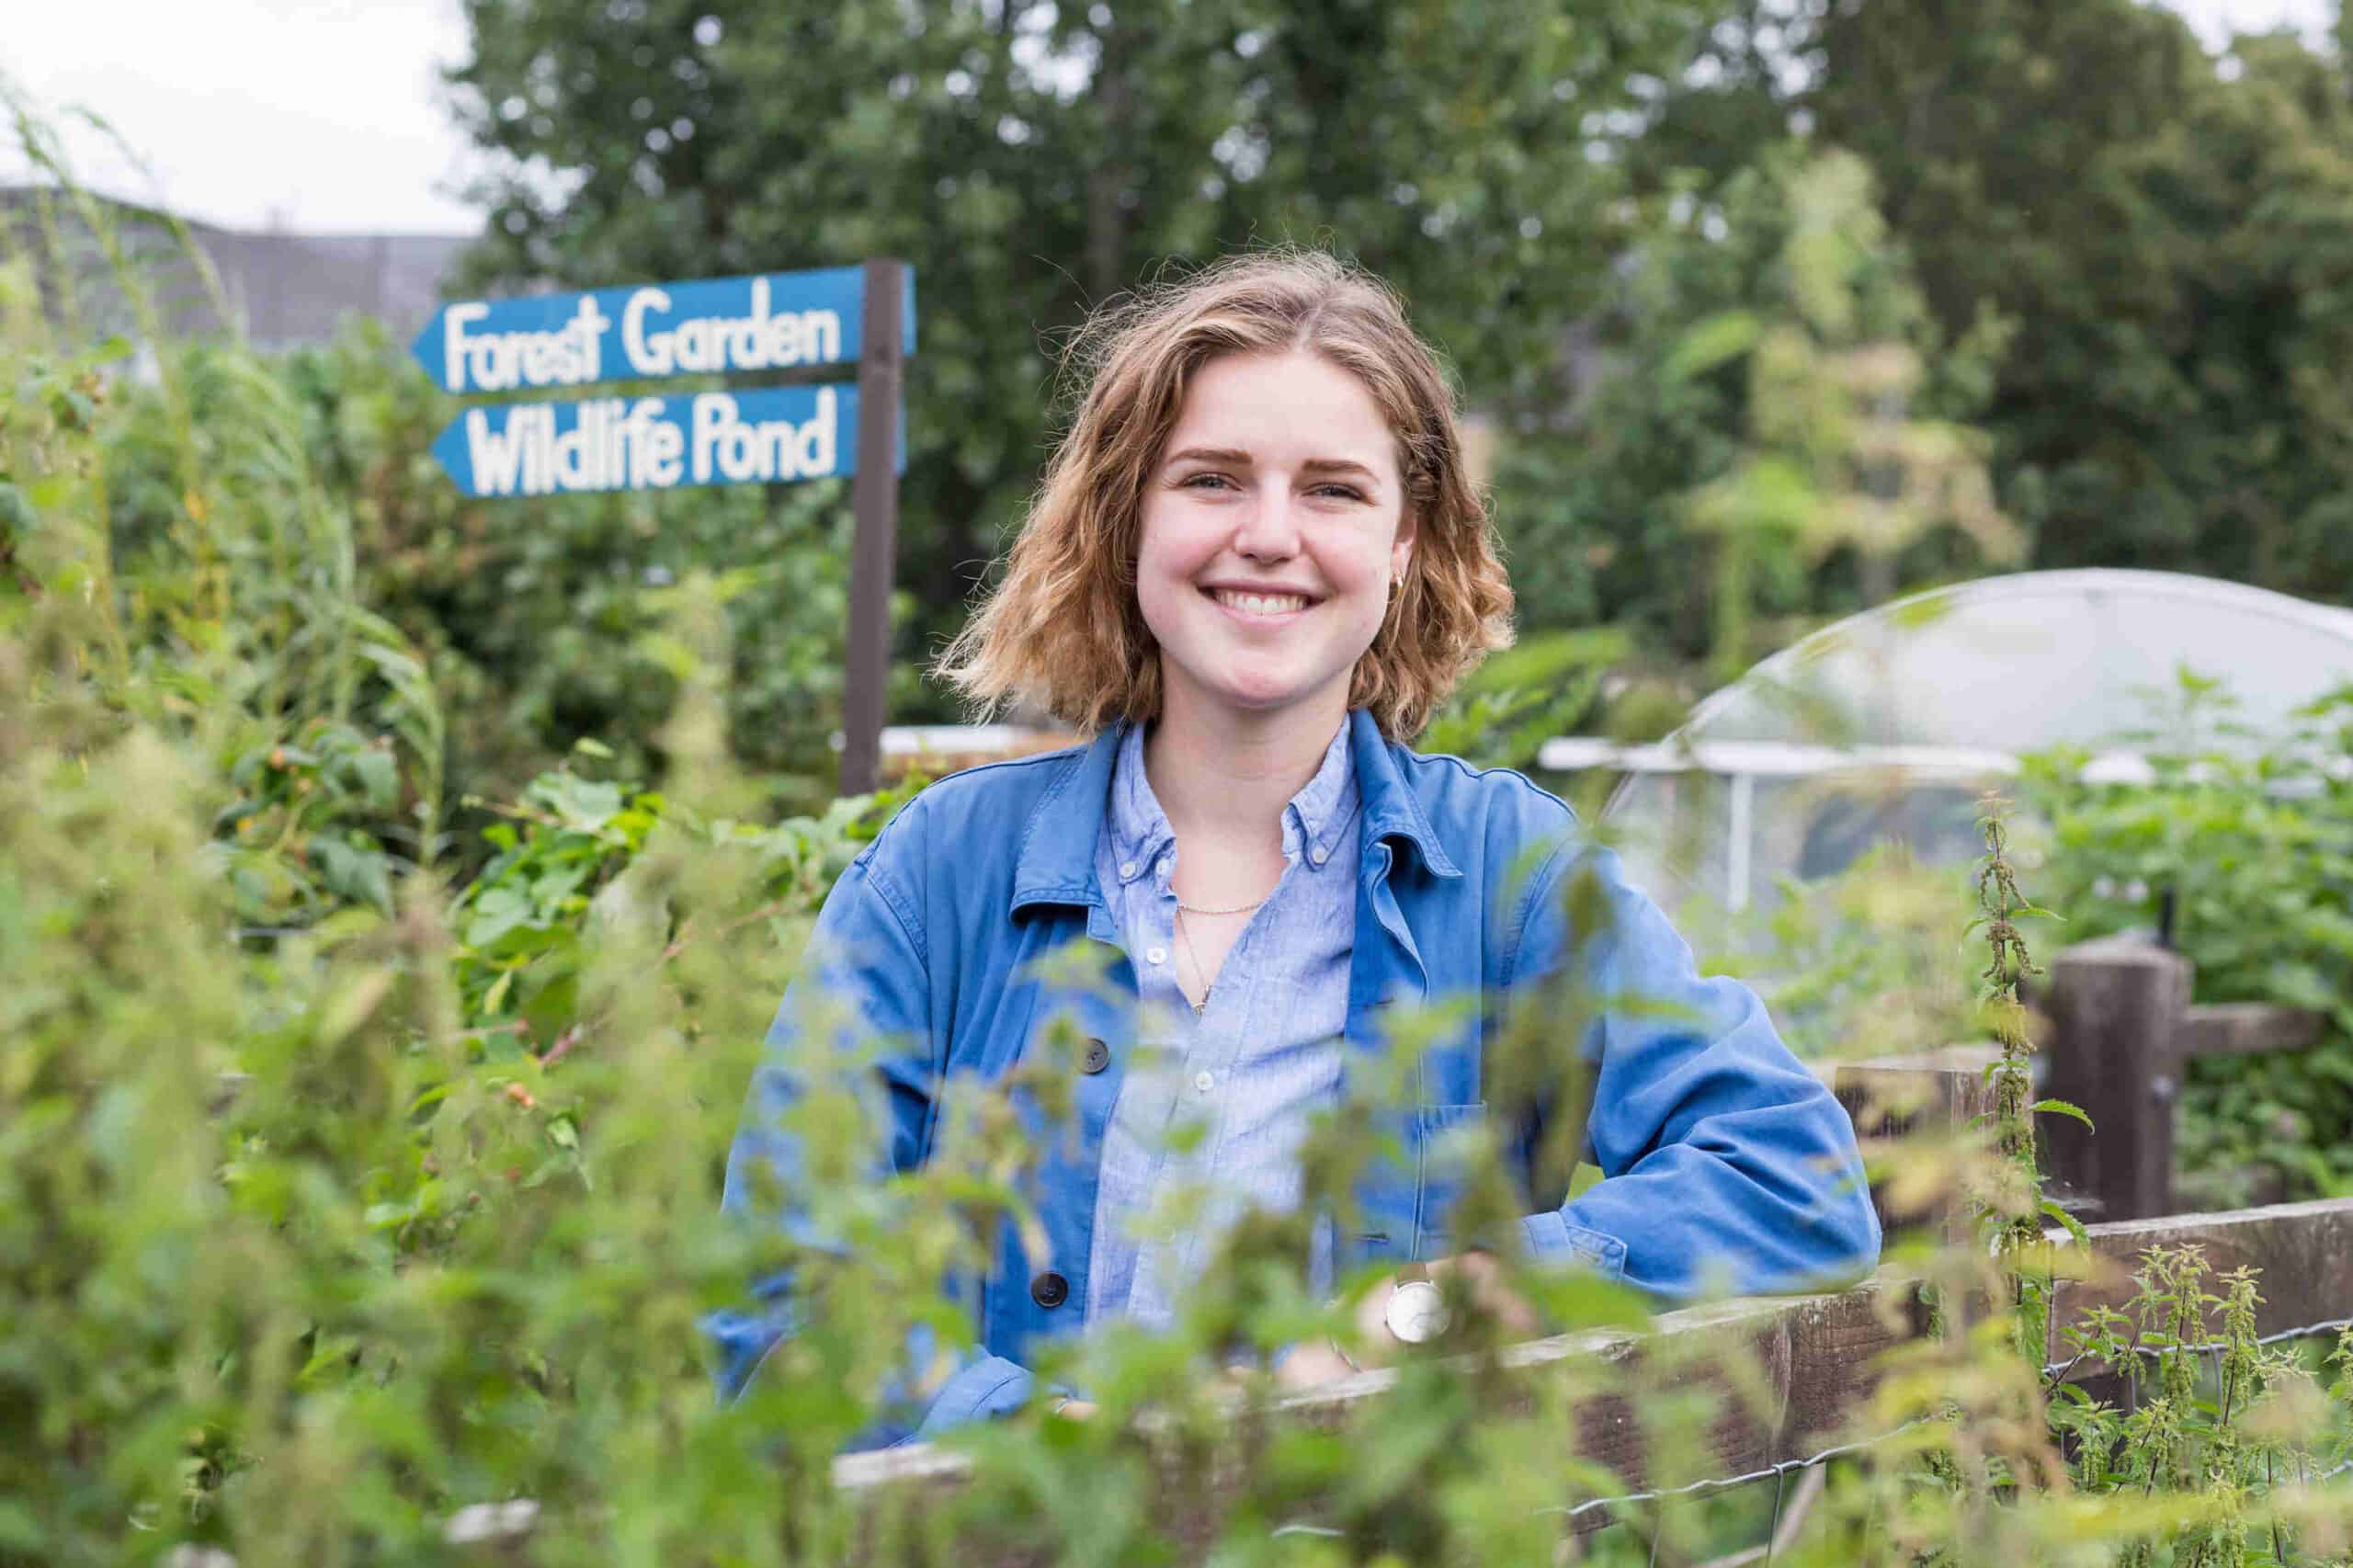 Georgia has light brown curly hair. She is wearing an electric blue chore jacket and light blue linen shirt. She's leaning on a fence surrounded by plants.